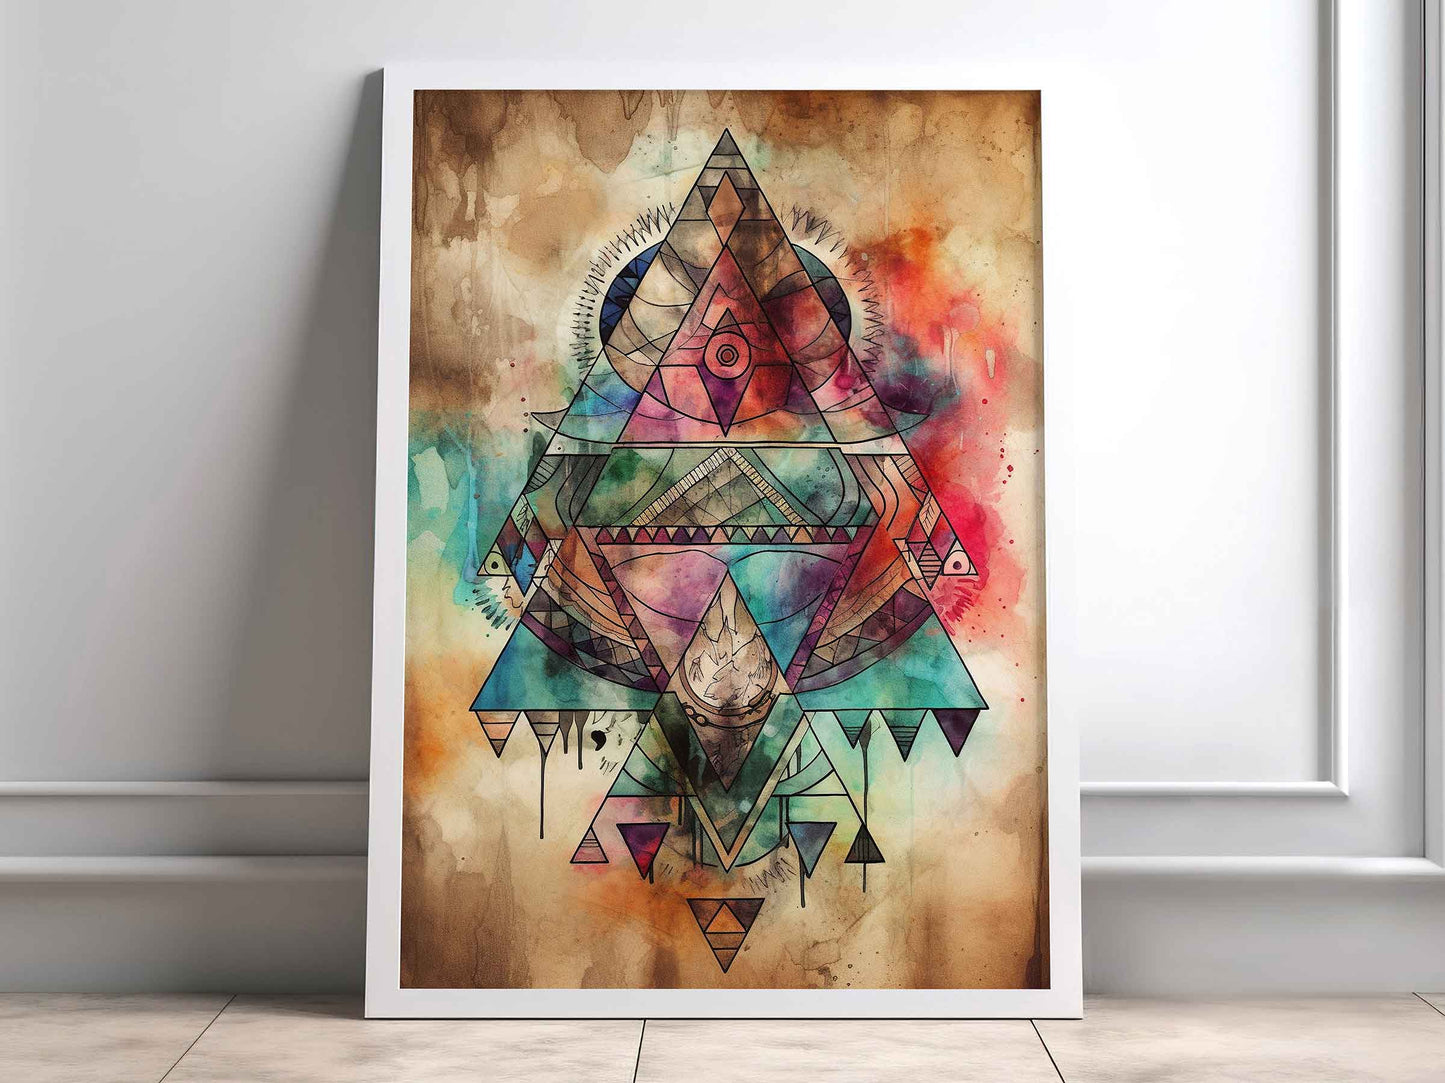 Framed Image of Boho Geometric Tribal Abstract Aztec Style Wall Art Poster Prints